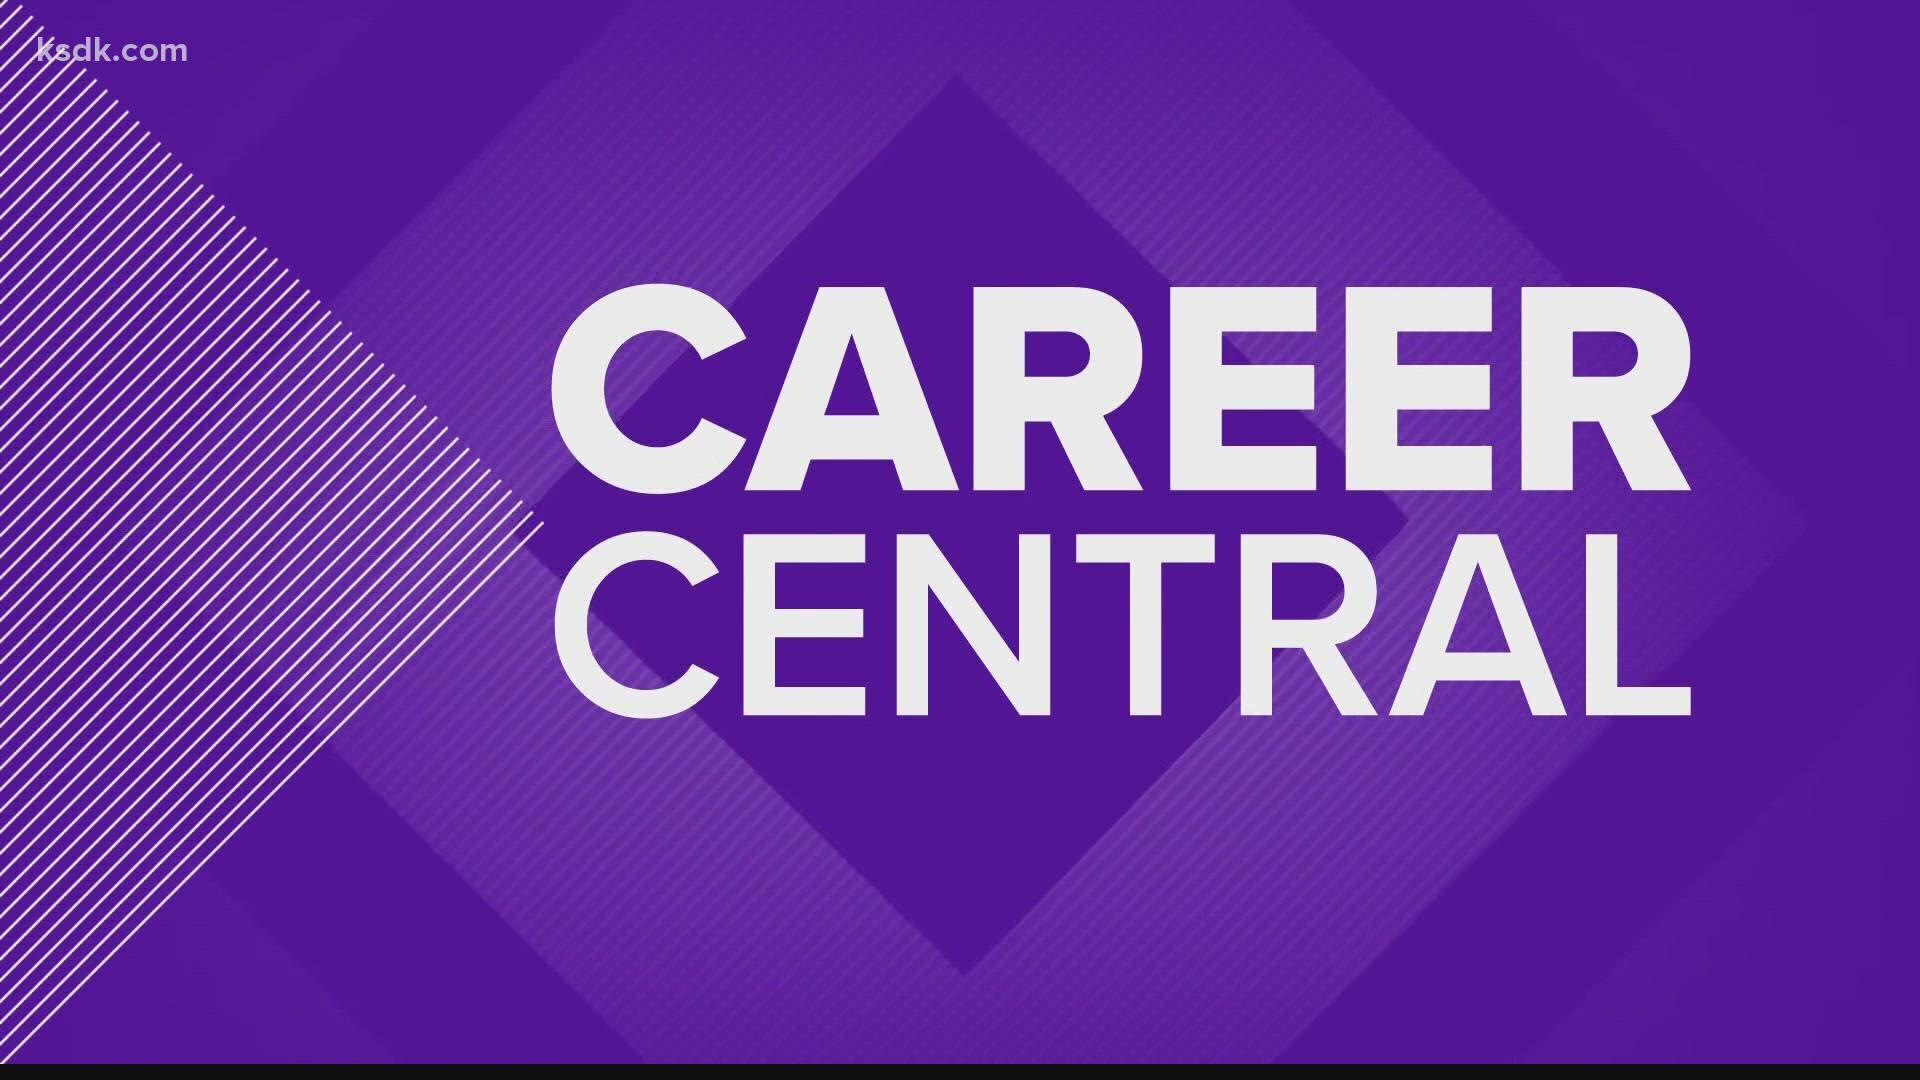 Career Central begins this week with a huge need to fill security jobs in our area. Also, several training and apprenticeship programs begin soon